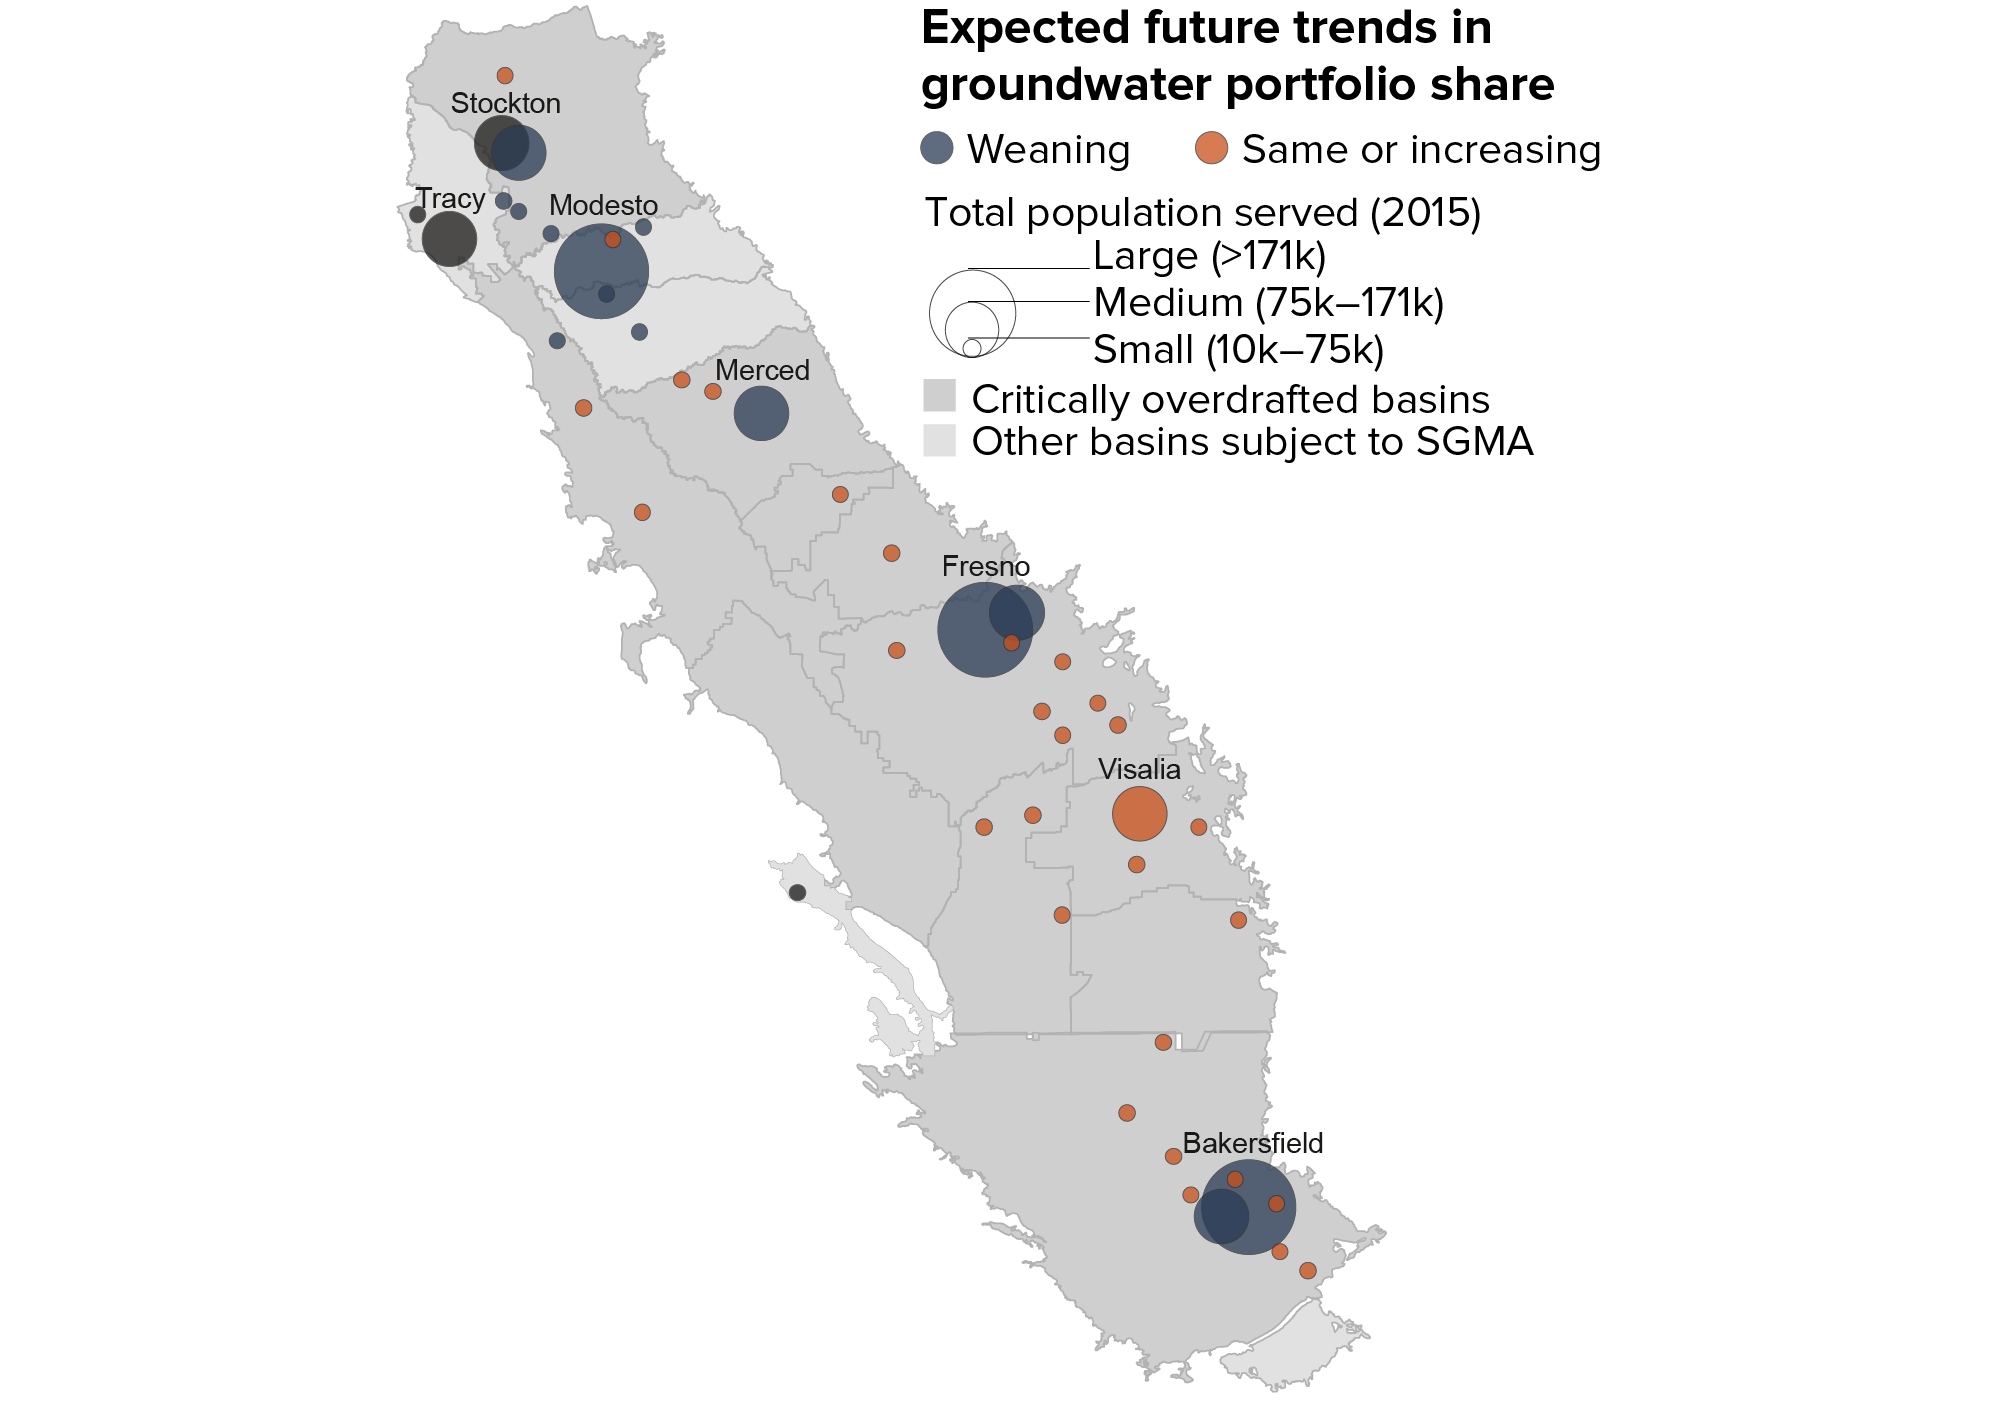 figure - Most small urban utilities planned to maintain or expand groundwater reliance